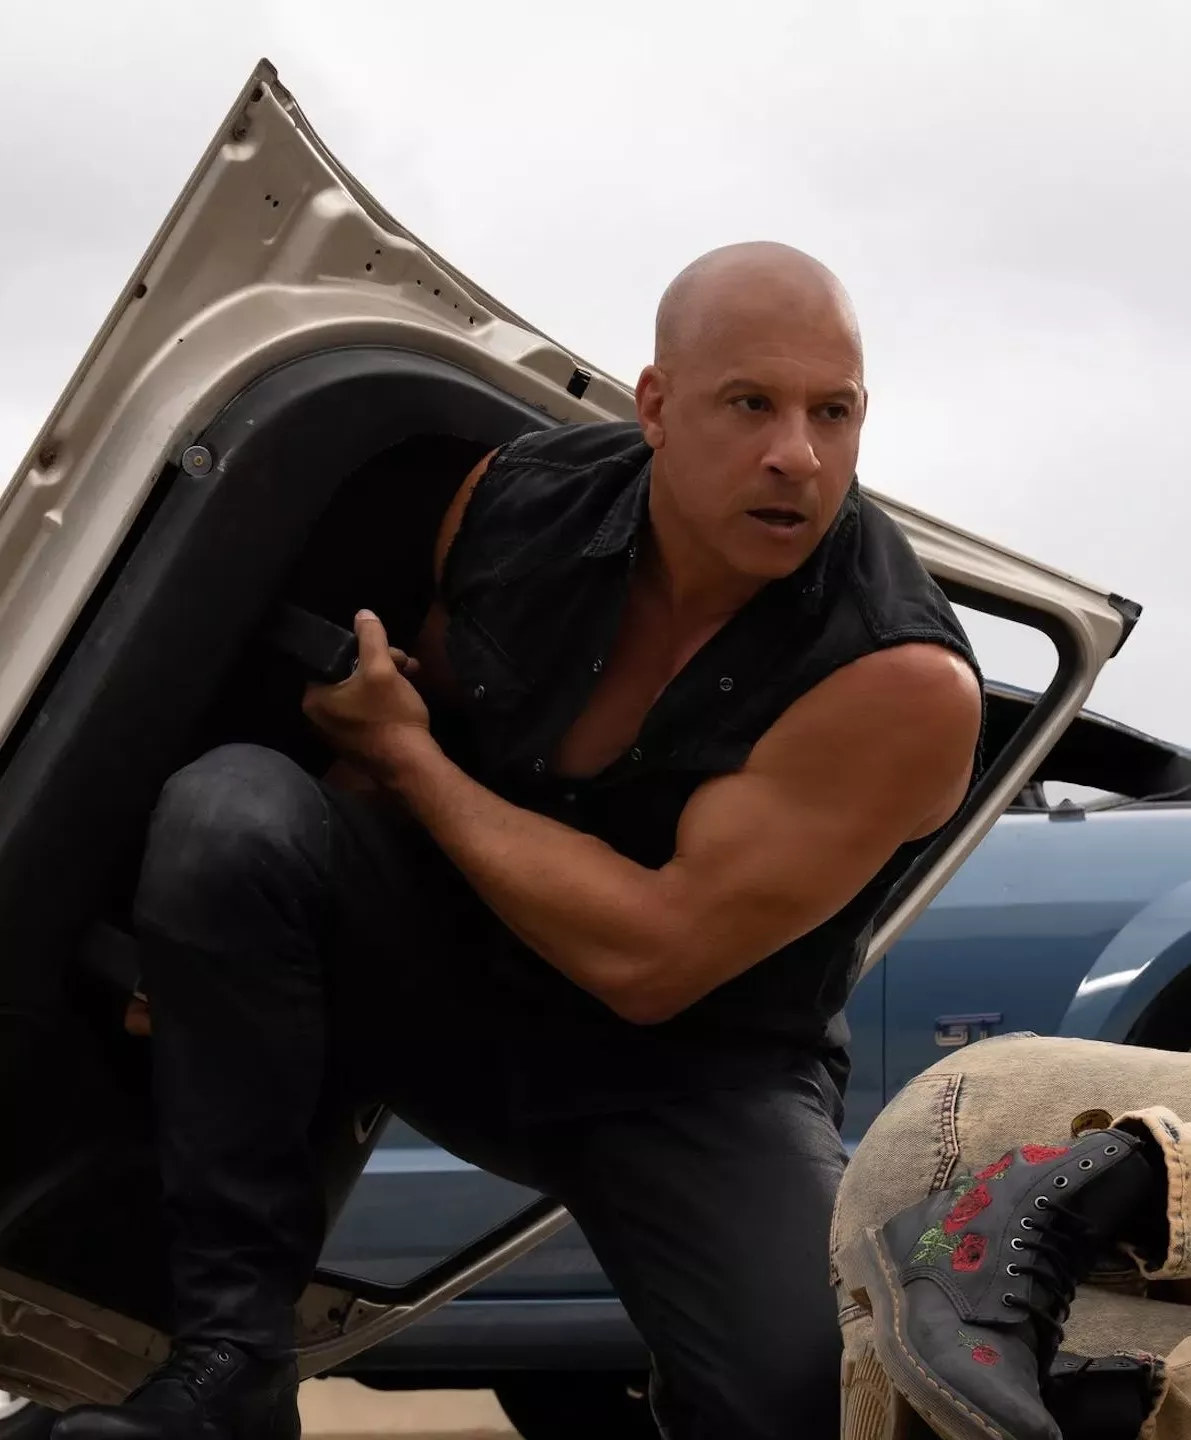 Fast and Furious 10: The Franchise Has Embraced Its Own Parody